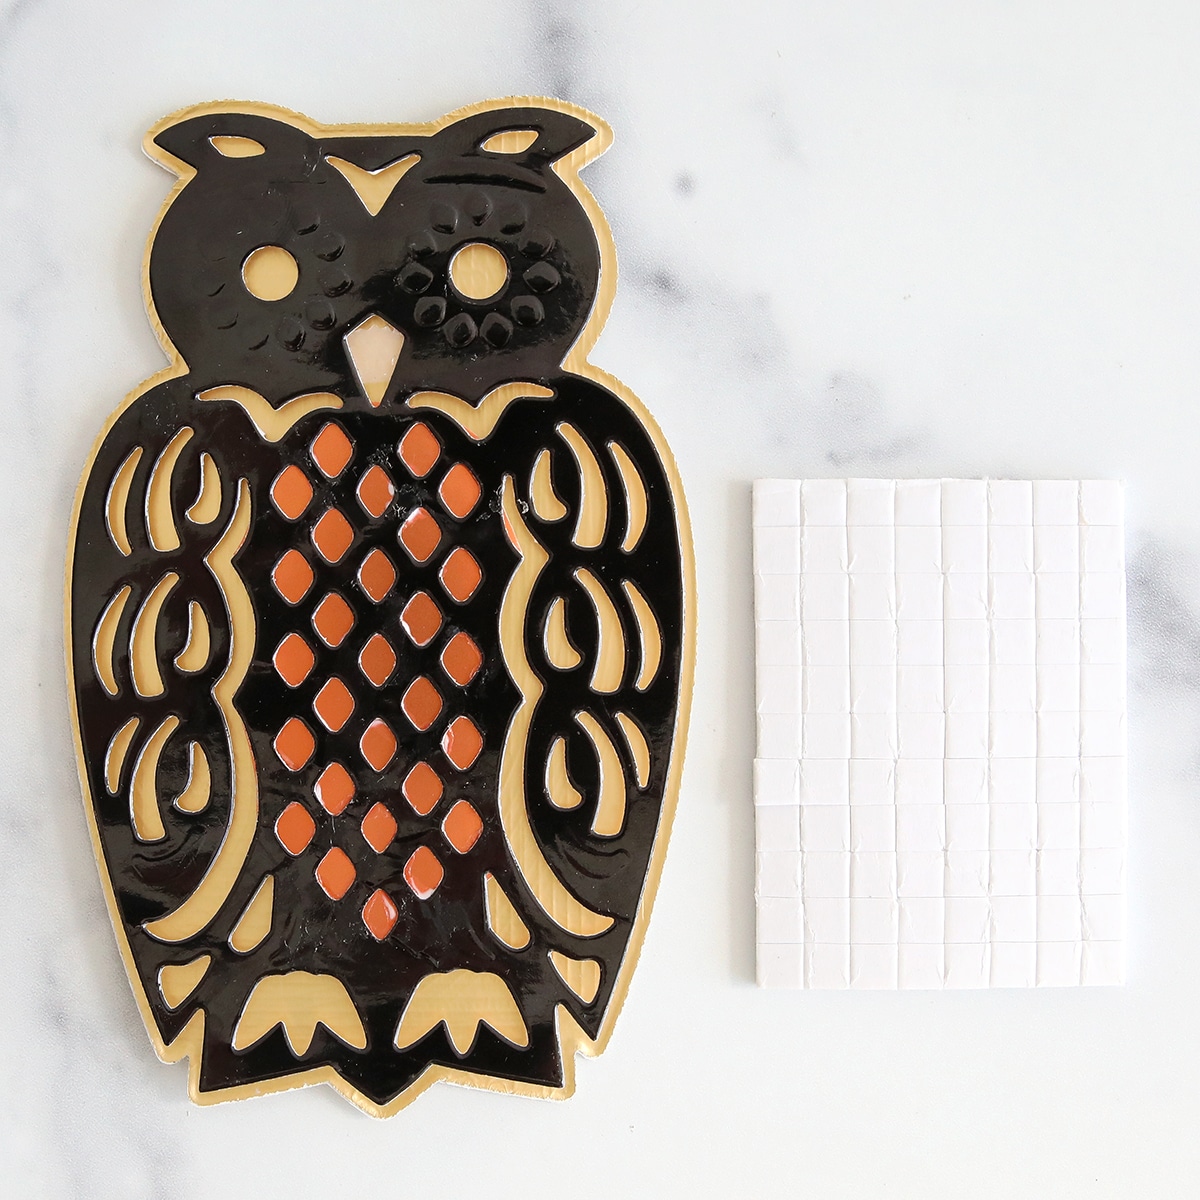 A black and orange owl cookie cutter next to a square of tiles.